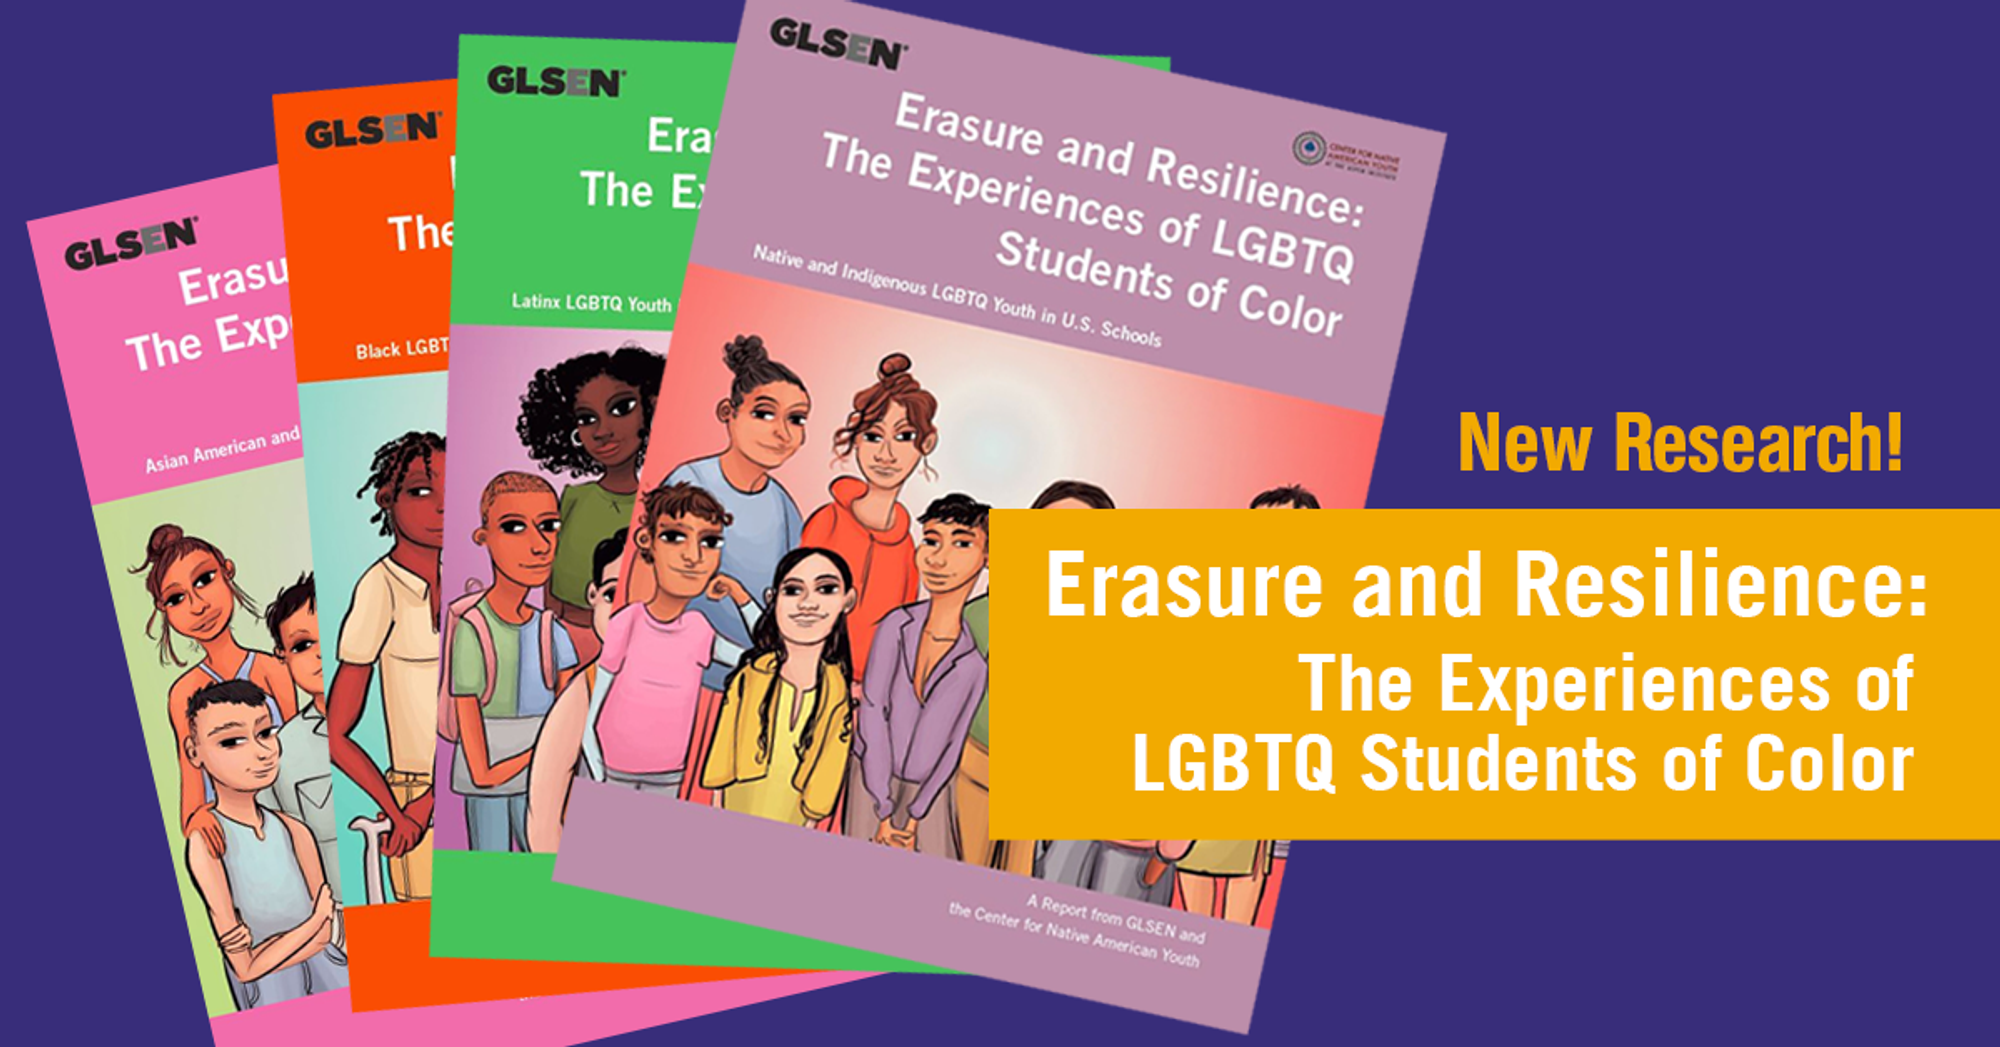 New Research Details How to Support LGBTQ Youth of Color, Who Face Racism, Homophobia, and Transphobia in Schools